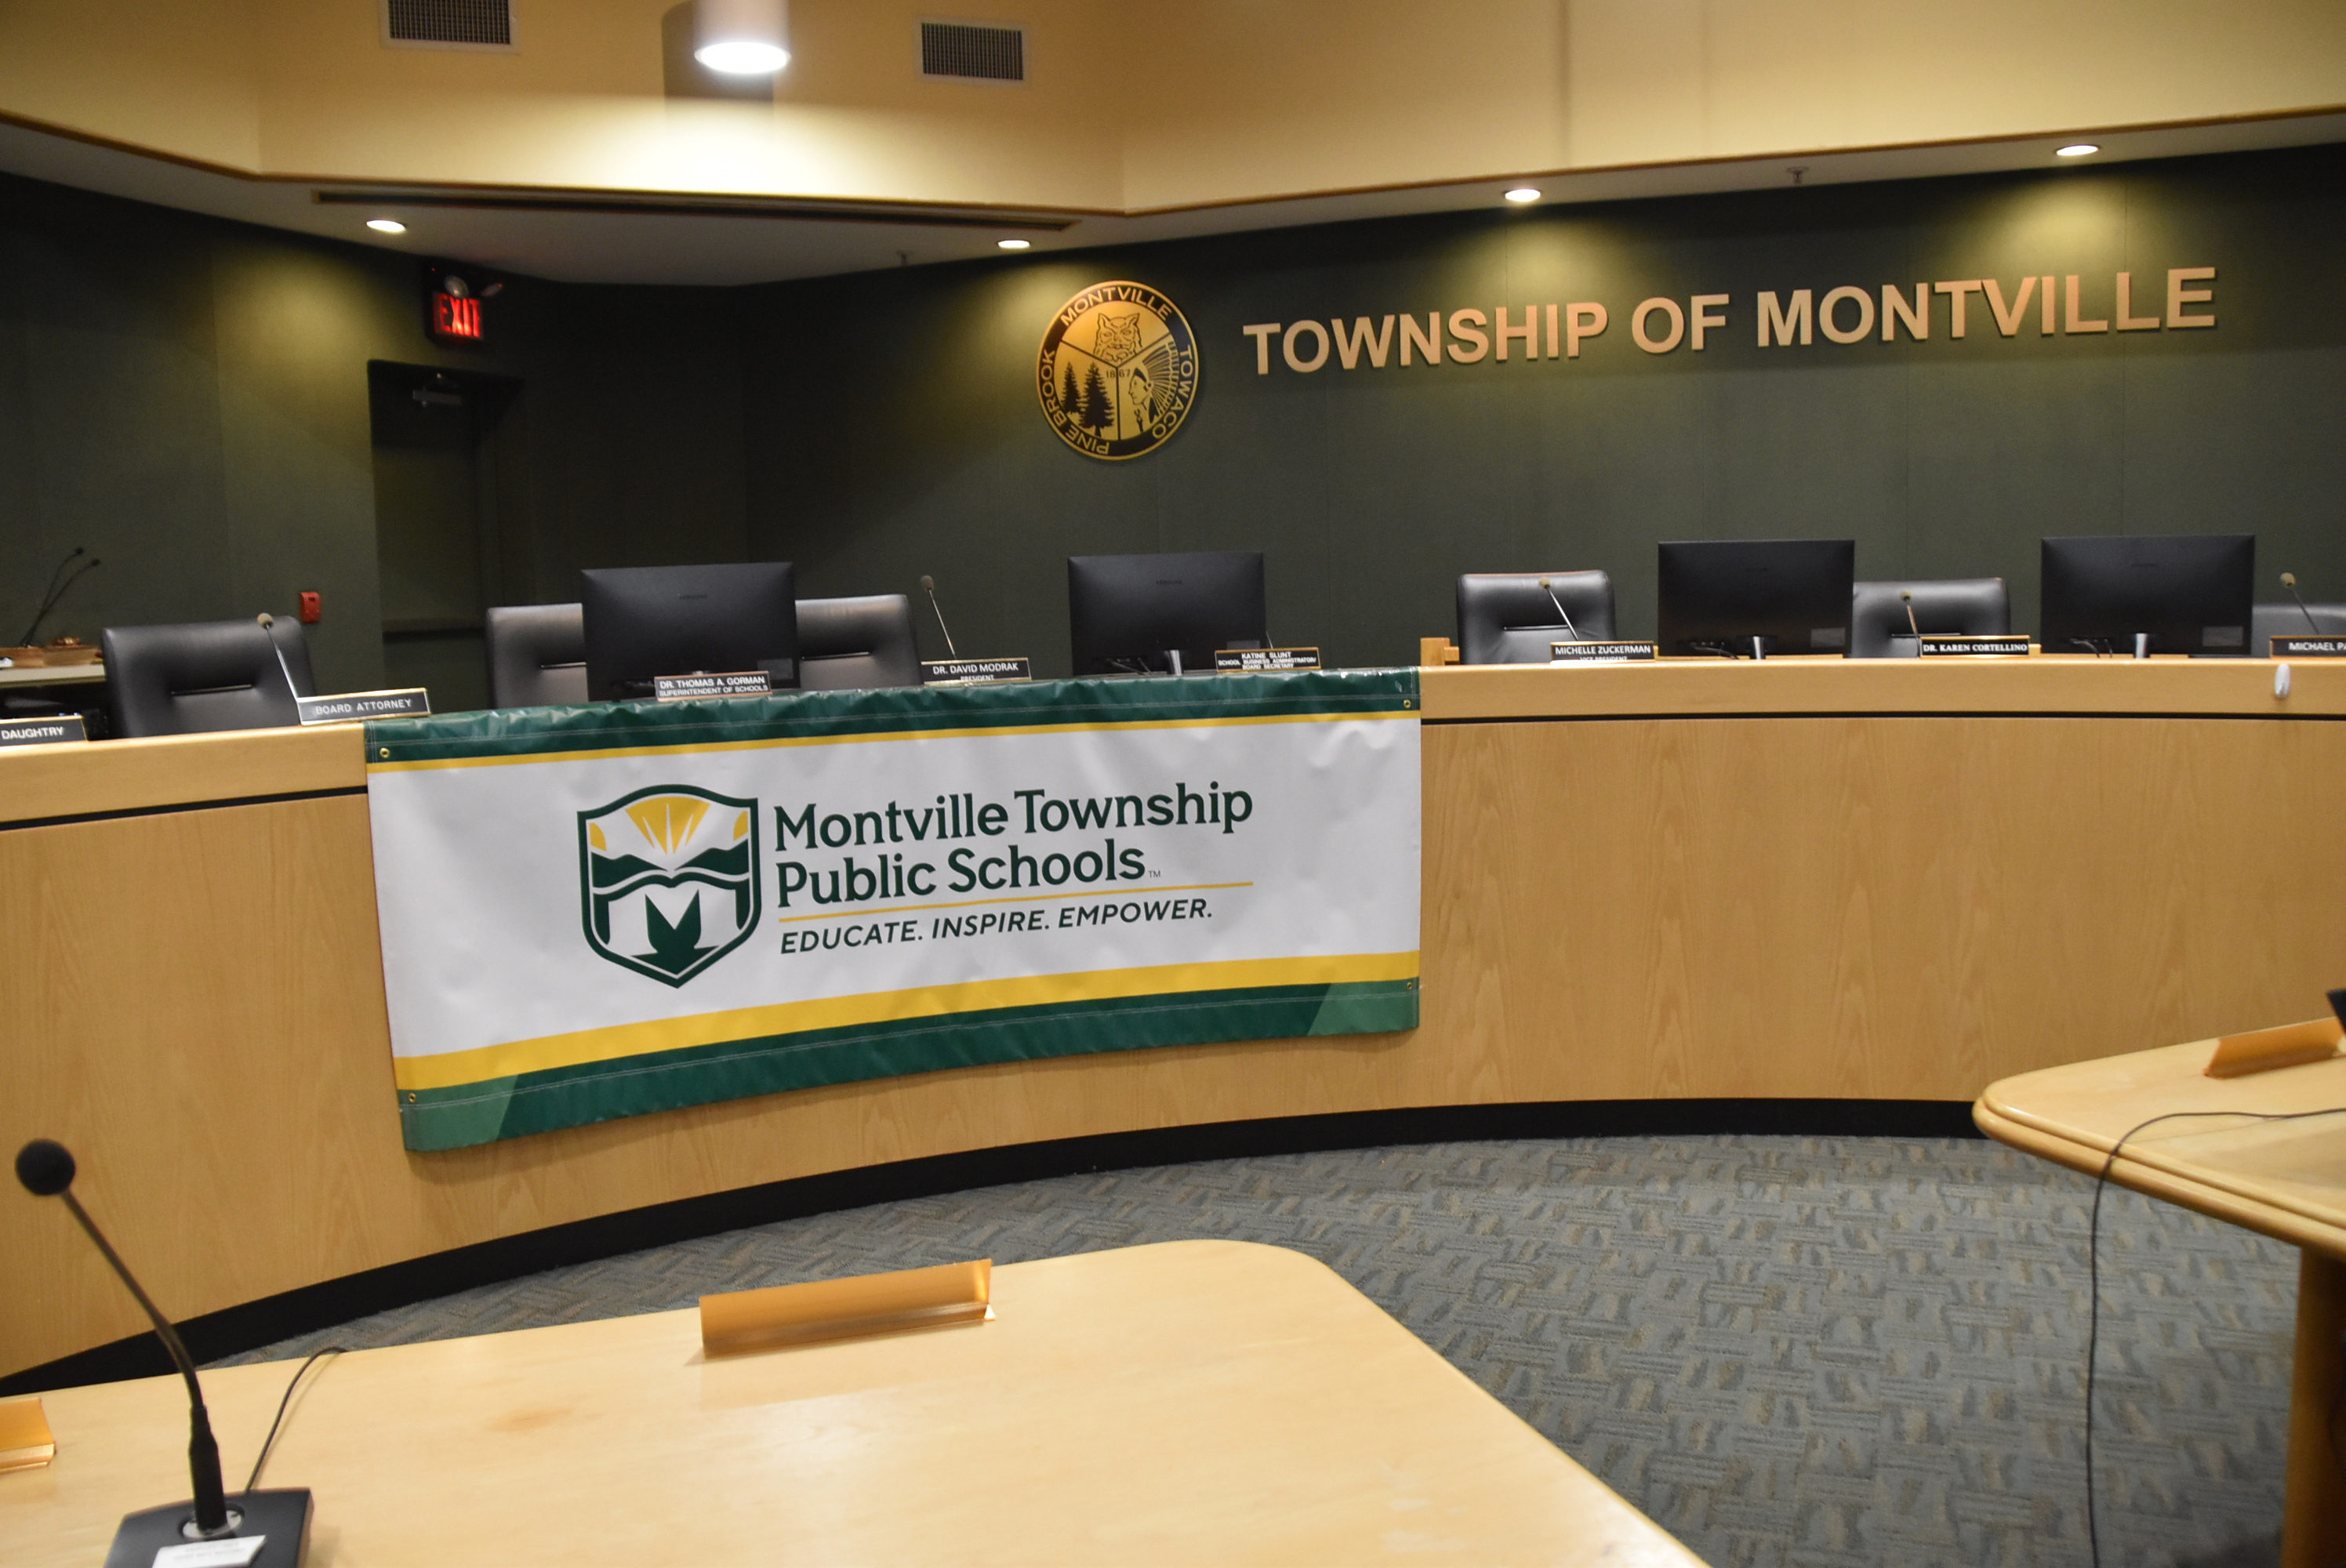 Montville Township Public Schools banner with logo and motto: Educate. Inspire. Empower. On the dais at Montville Township Municipal Building.